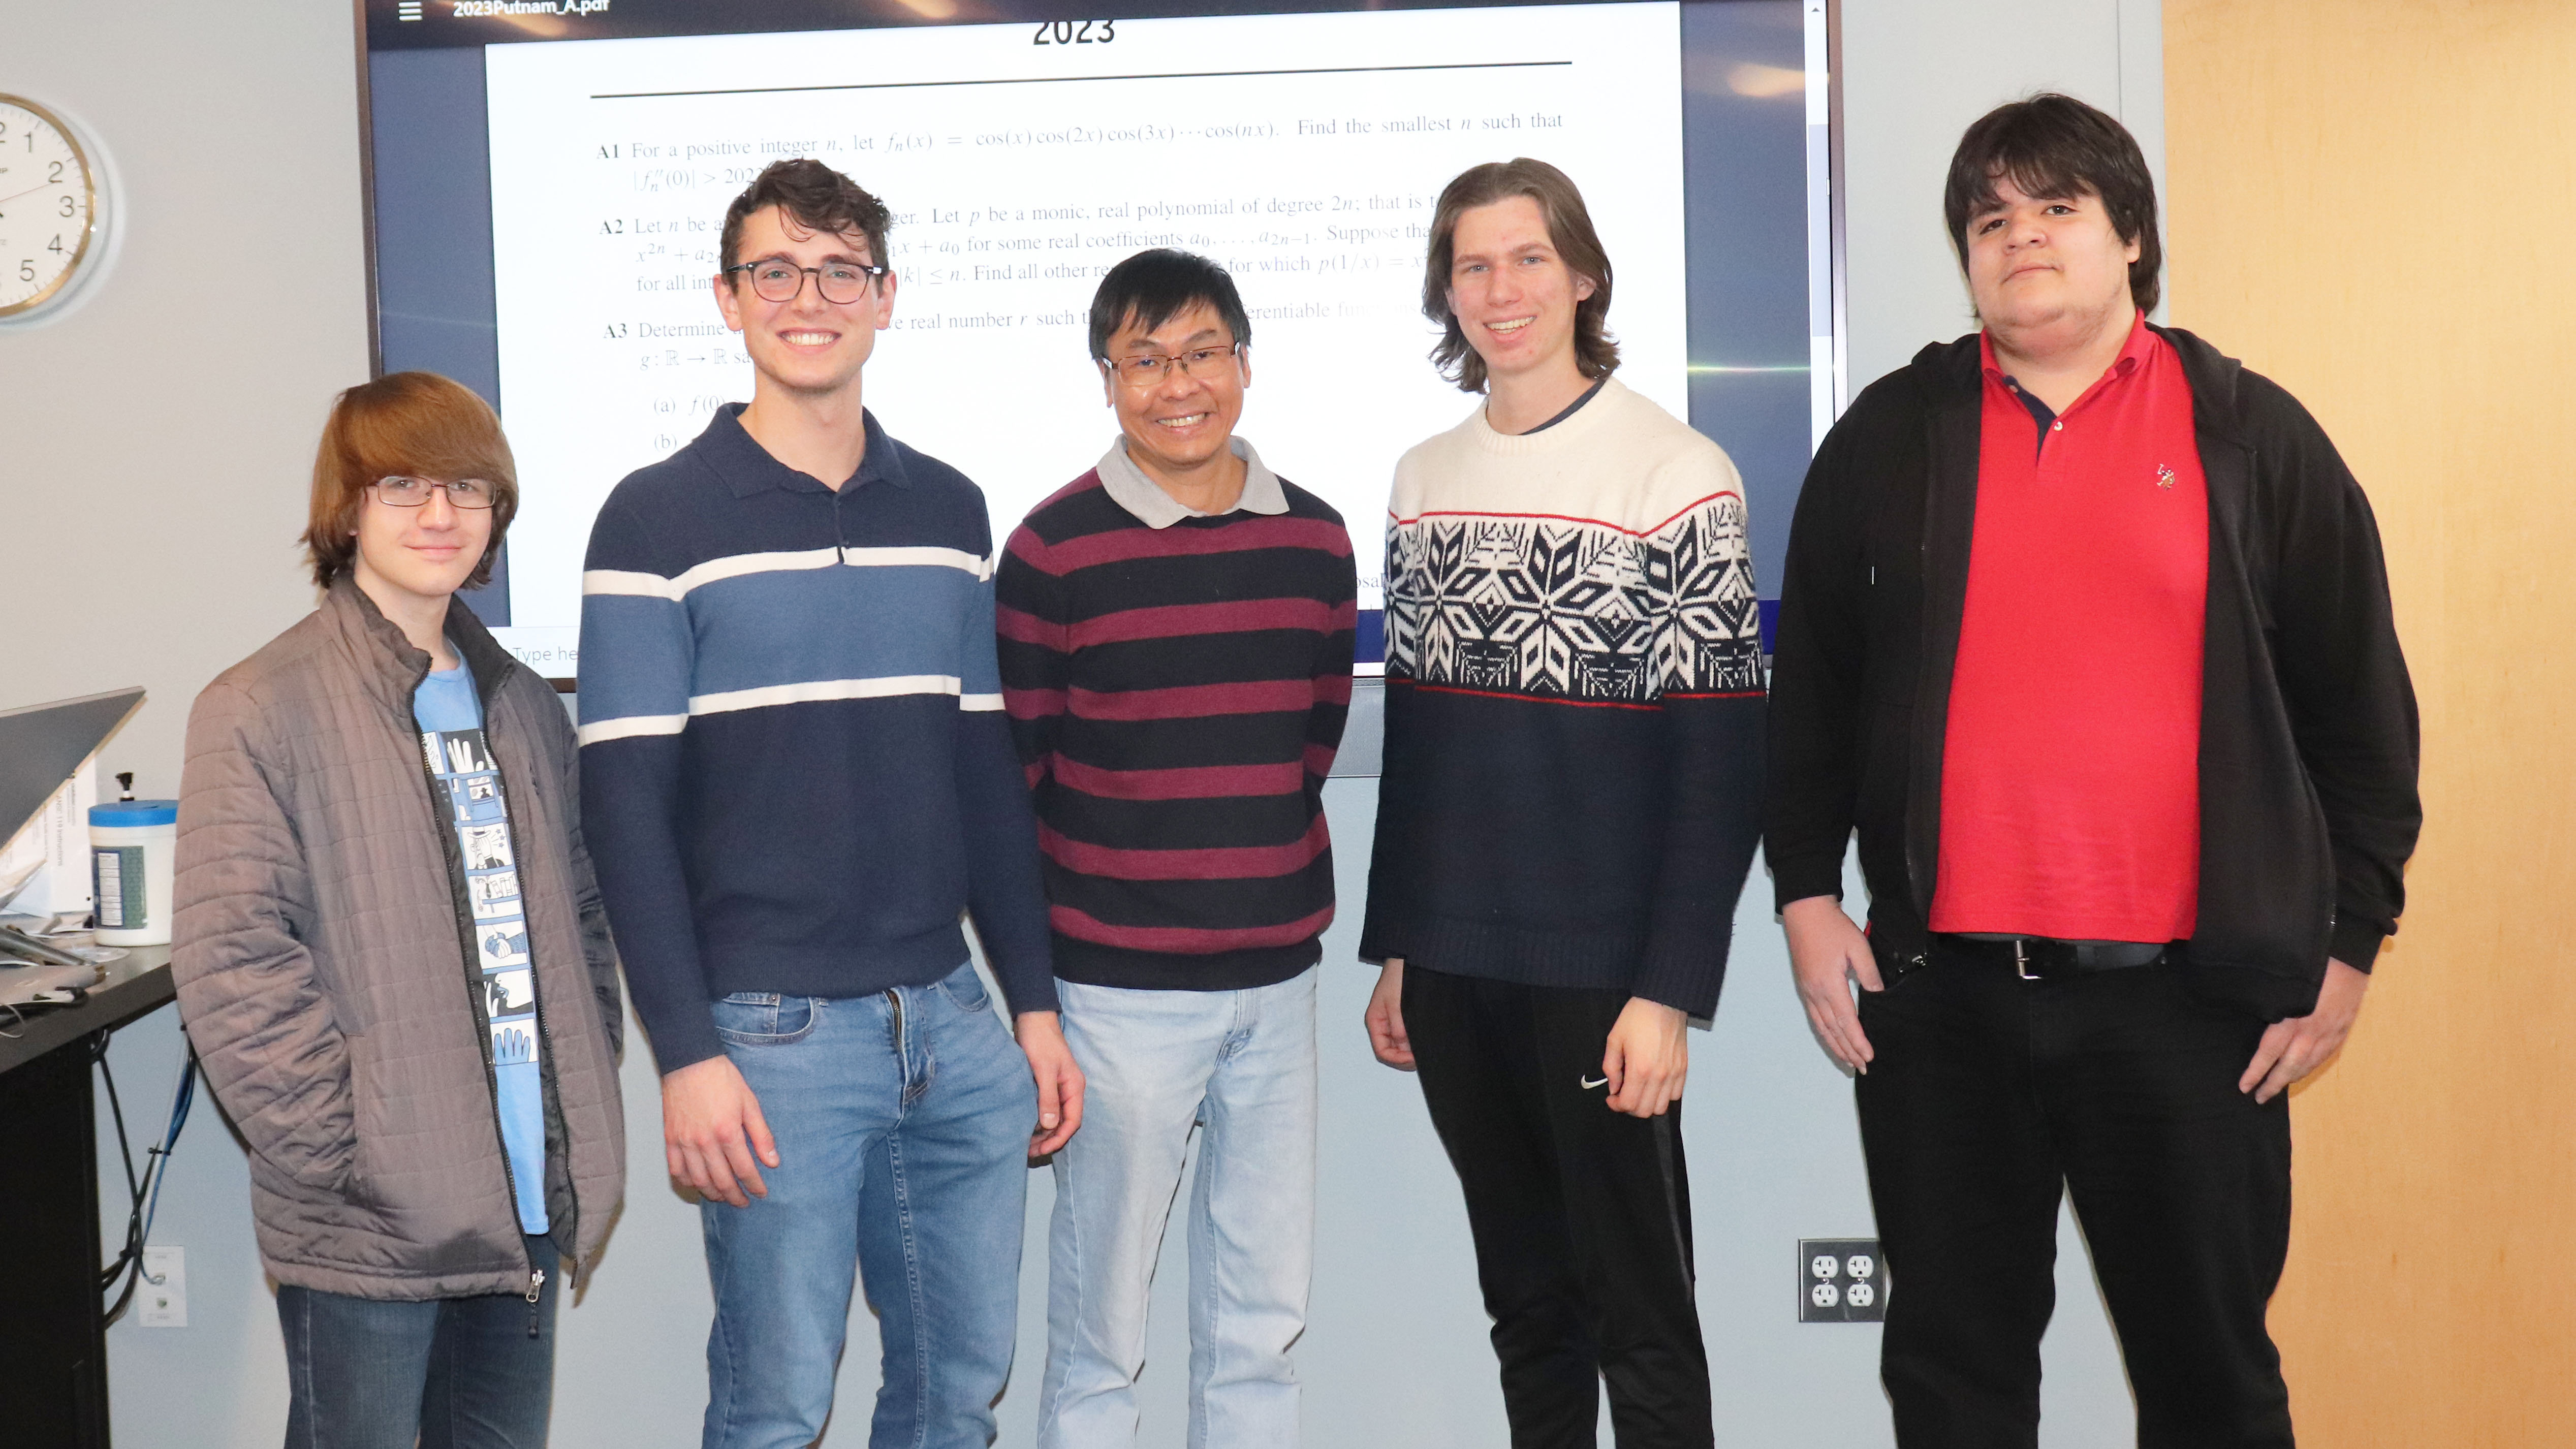 From left, USU Putnam Mathematics Competition team members Jason Atwood, Hyrum Cooper, USU faculty mentor Nghiem Nguyen, Carter Green and Brian Armenta. Additional team members are Cole Neiderman and Emily Wessman.